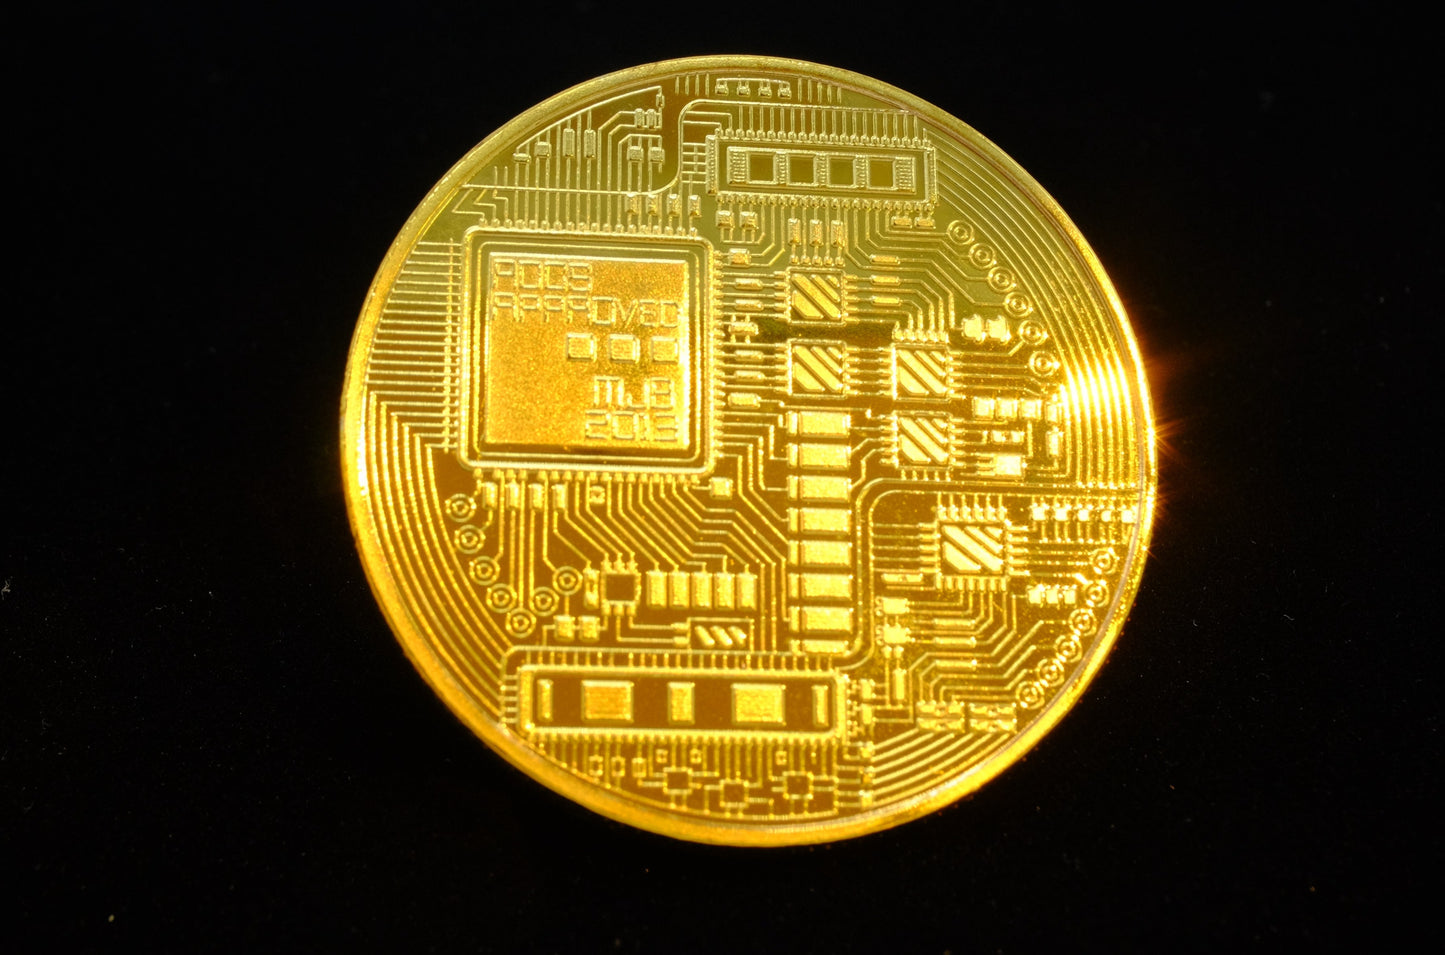 Gold Bitcoin Coin with Gold B